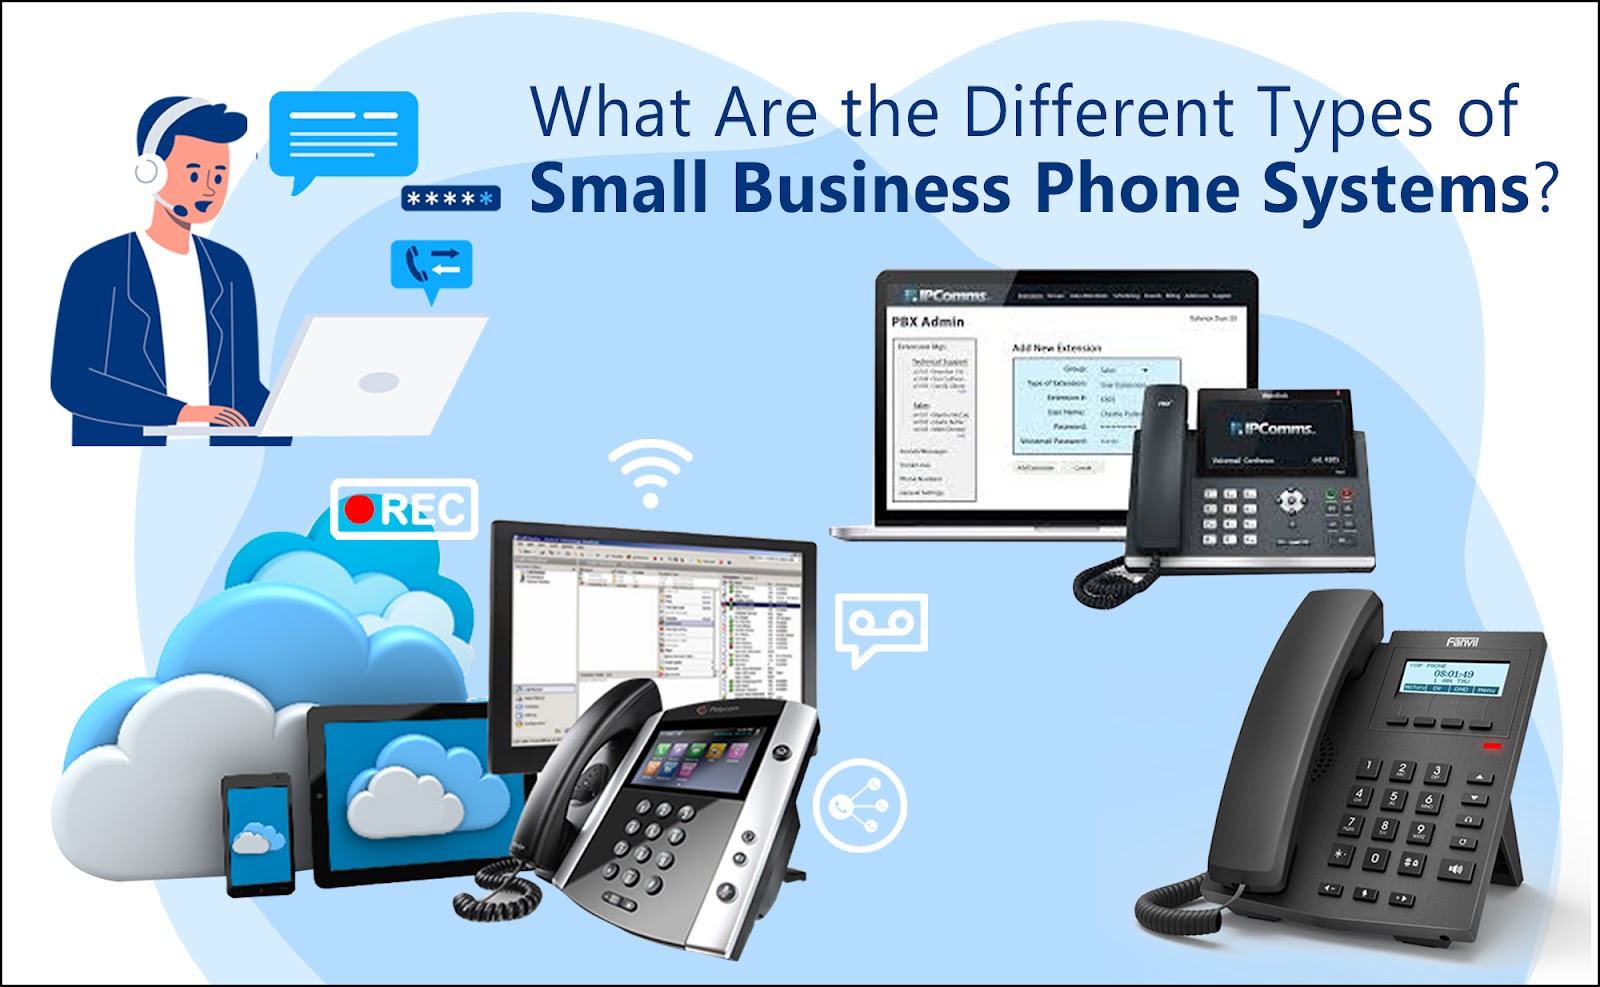 What Are the Different Types of Small Business Phone Systems?